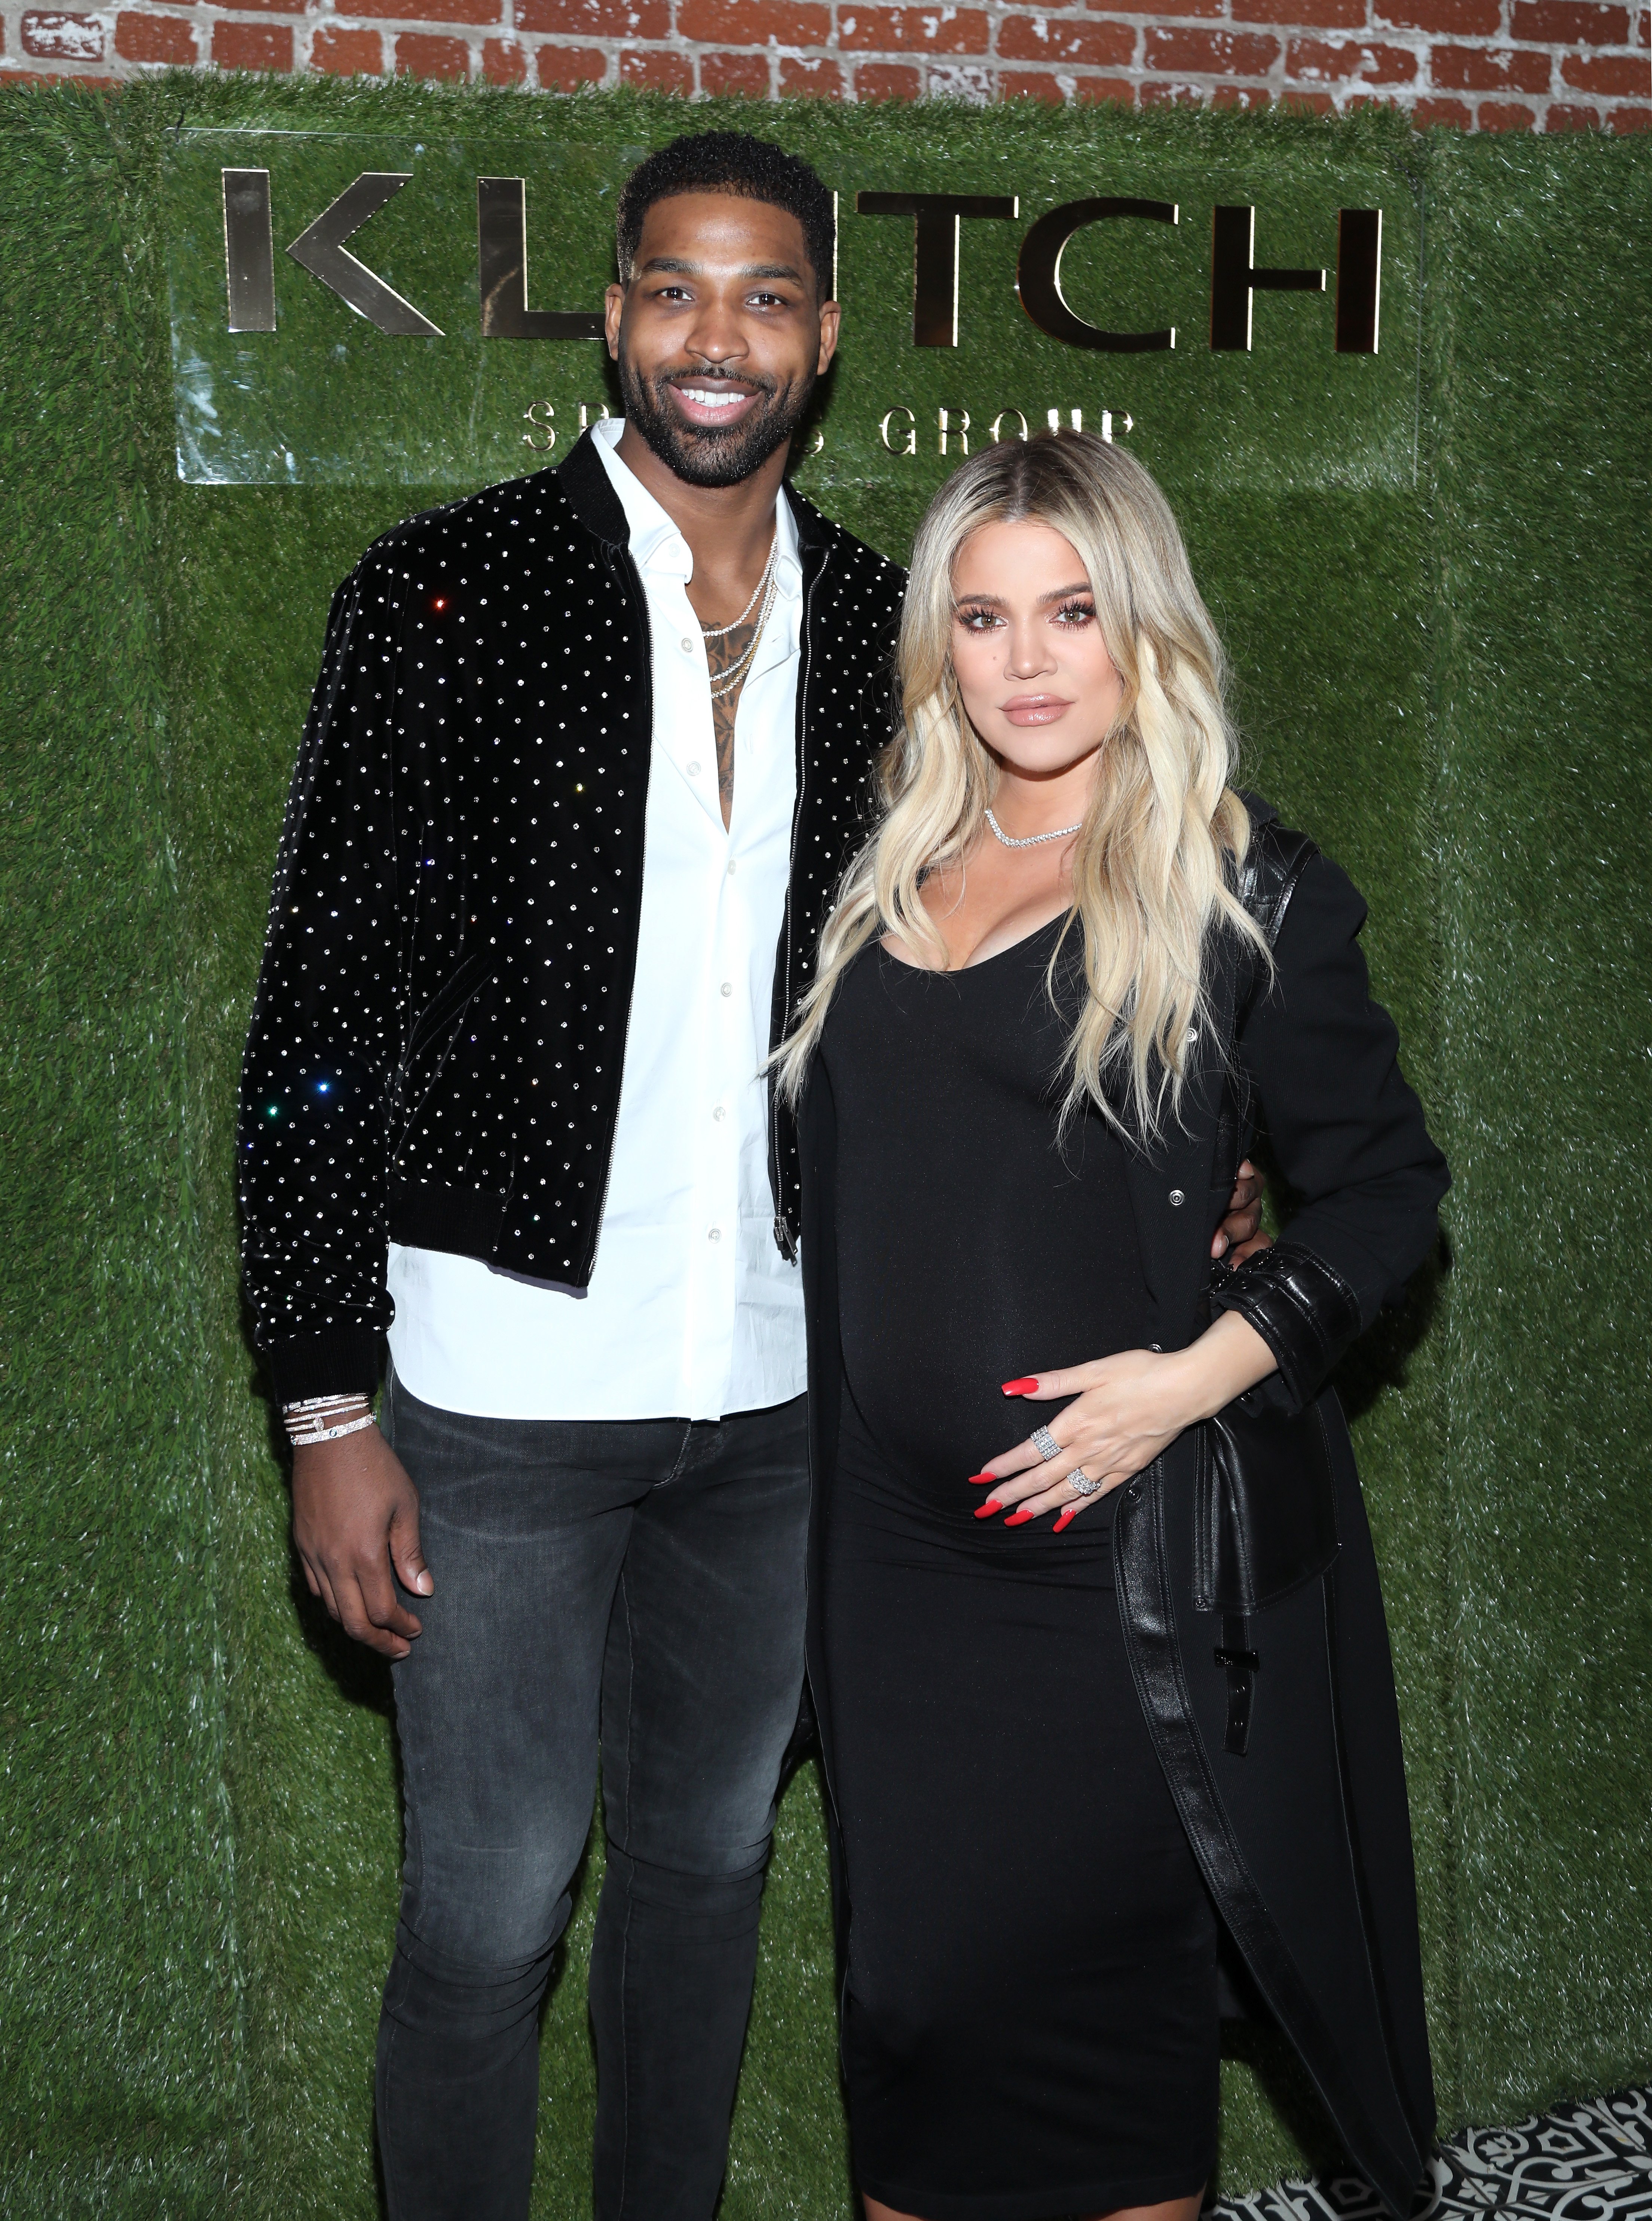 A pregnant Khloe Kardashian and Tristan Thompson at a Klutch Sports event in L.A., February, 2017. | Photo: Getty Images.